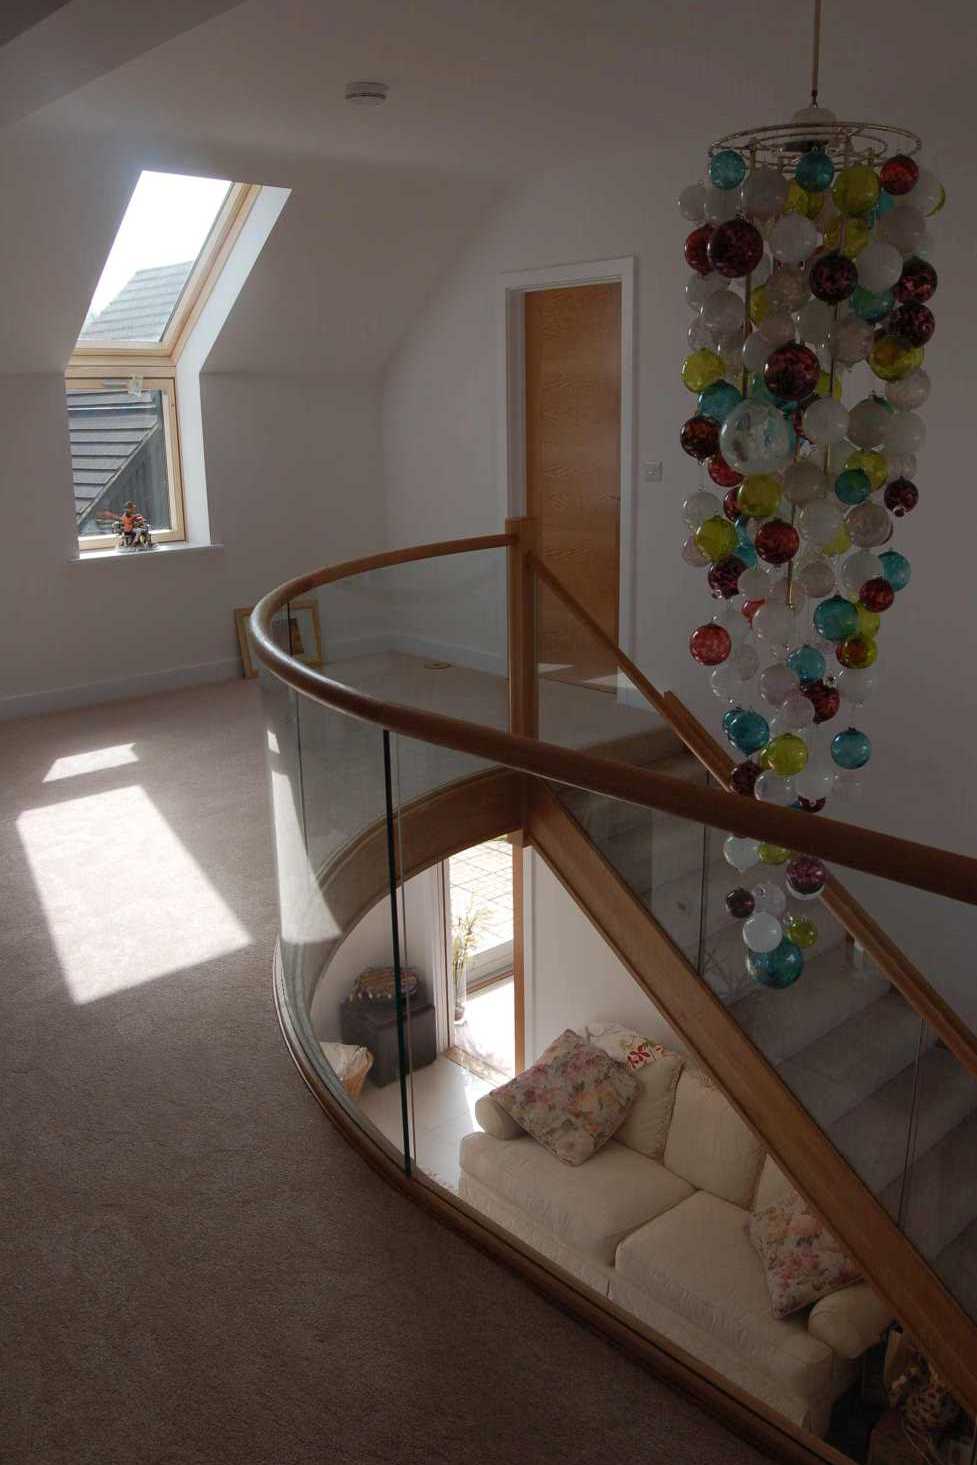 House stairway